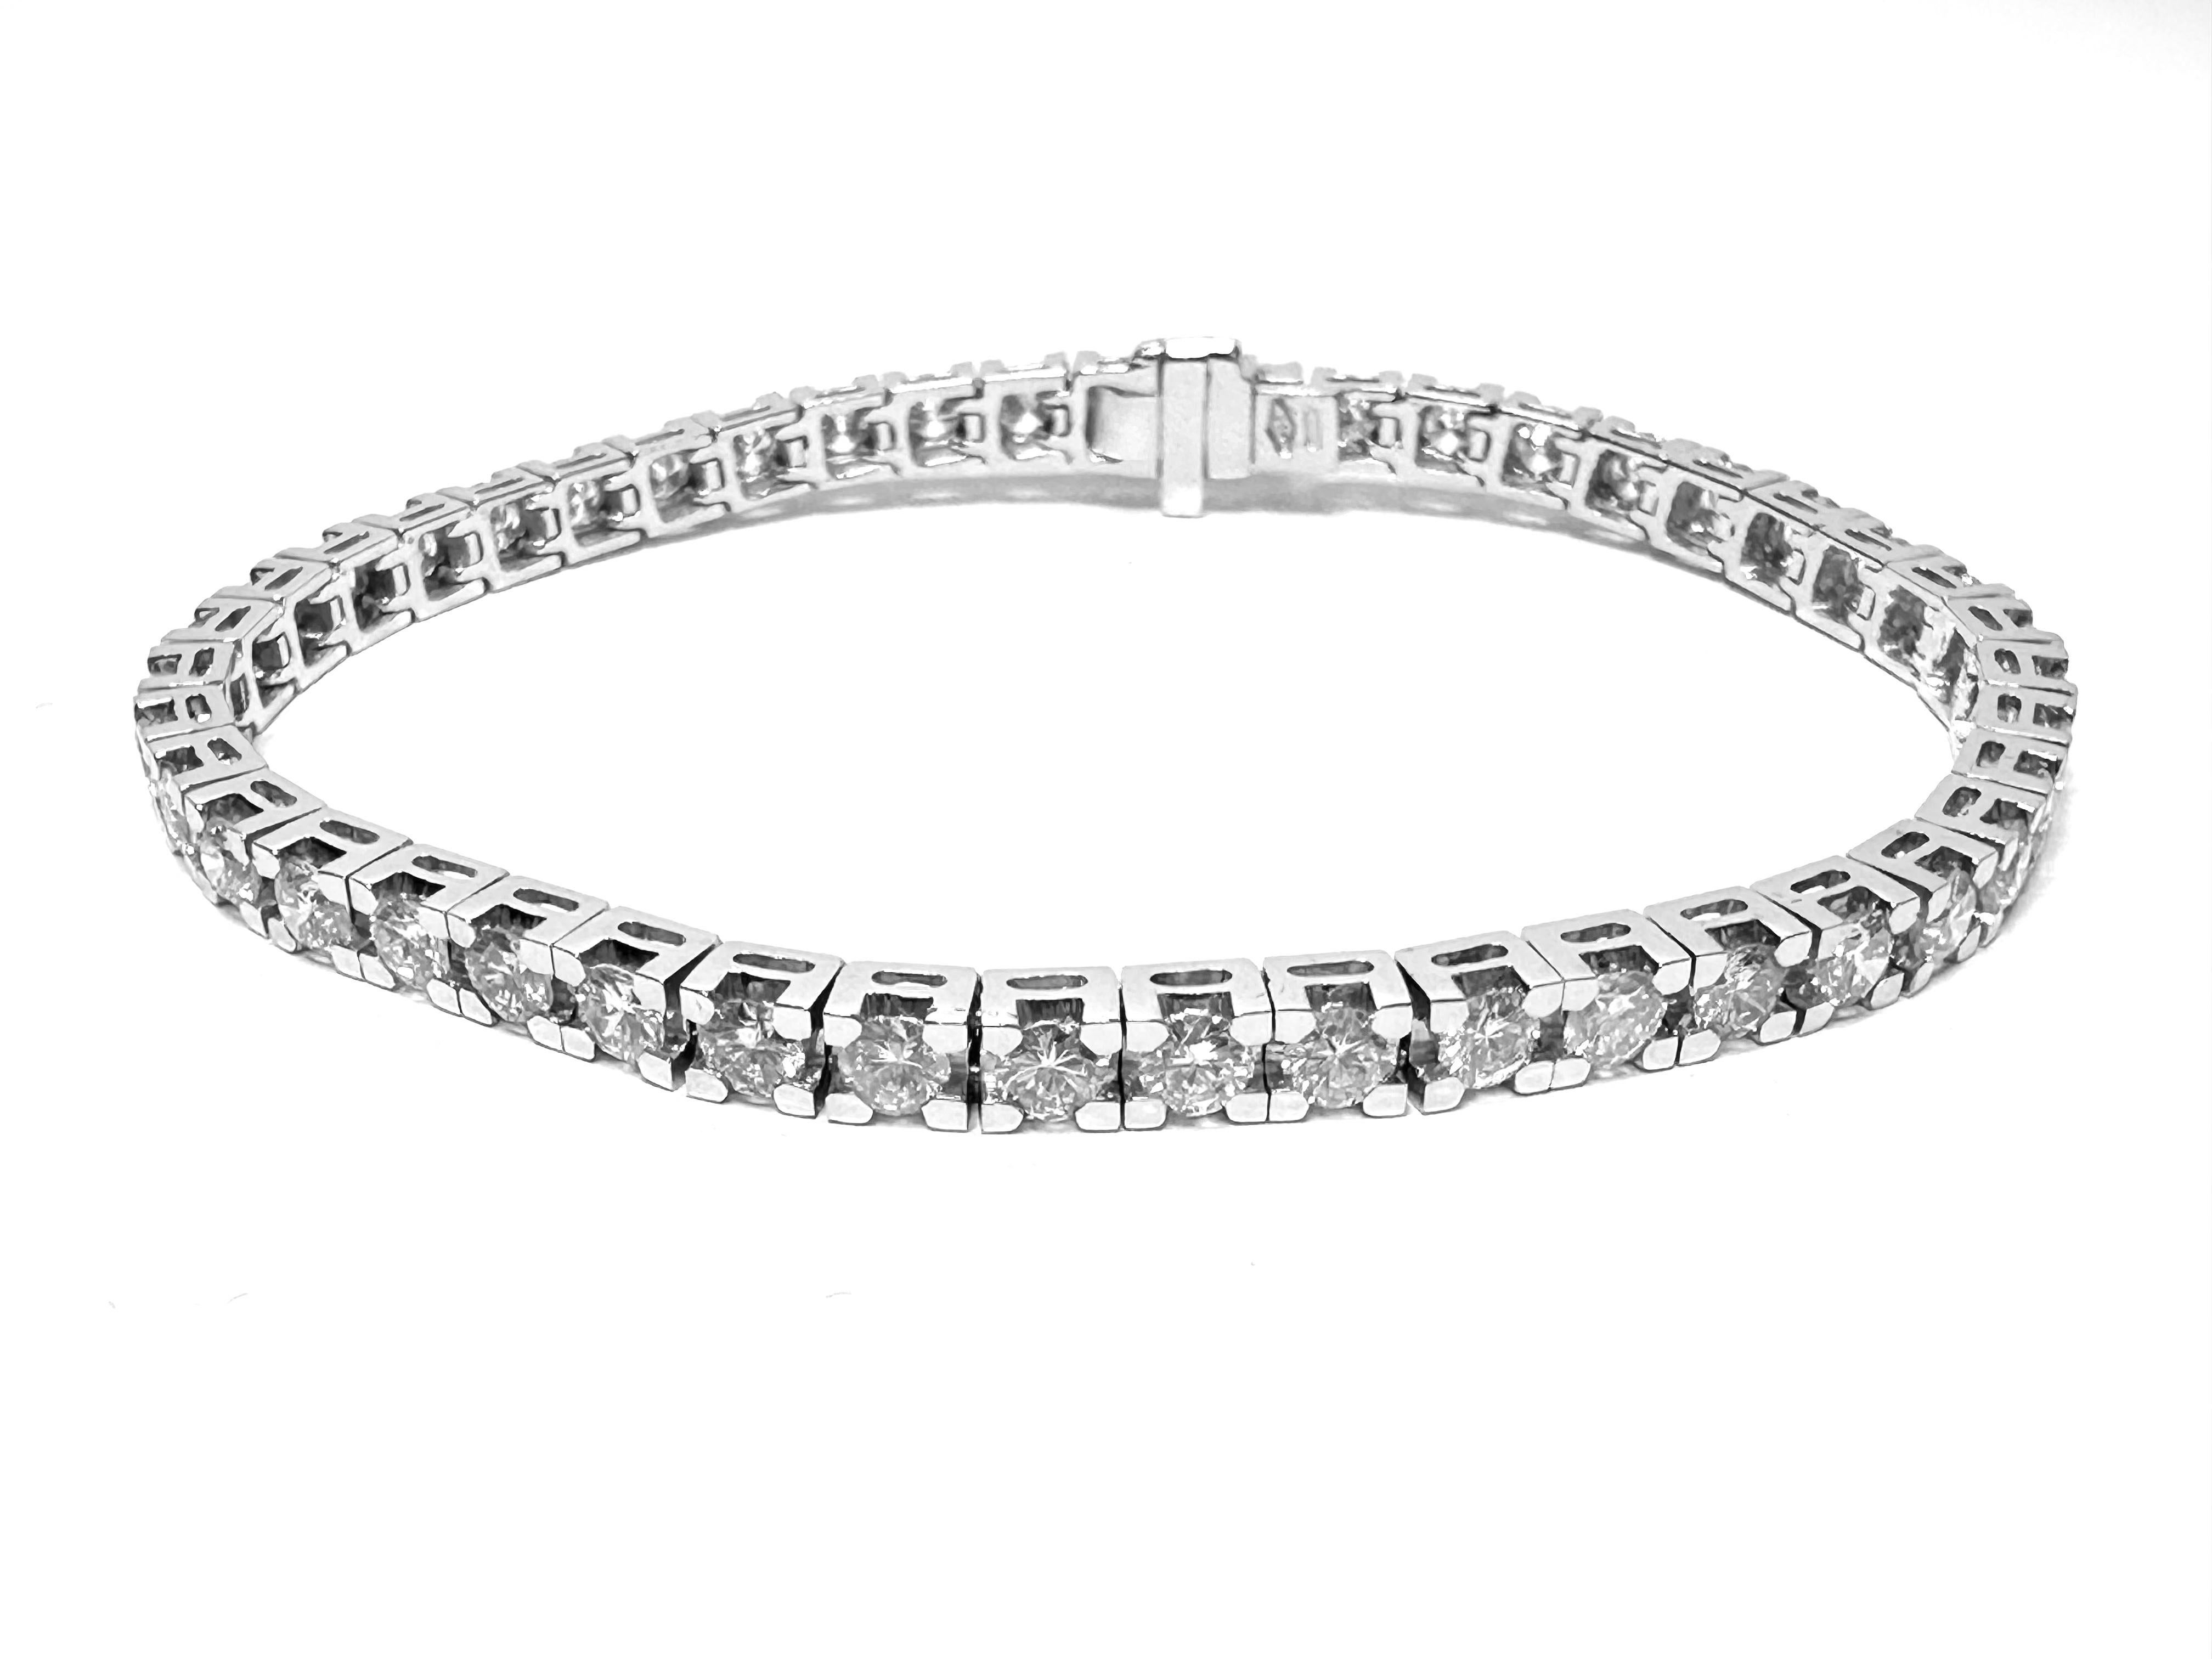 The HRD Certified Tennis Bracelet in White Gold is a stunning piece of jewelry that exudes sophistication and elegance. Crafted from 18kt white gold, this bracelet features a mesmerizing array of diamonds totaling 5.60 carats in weight.

Each